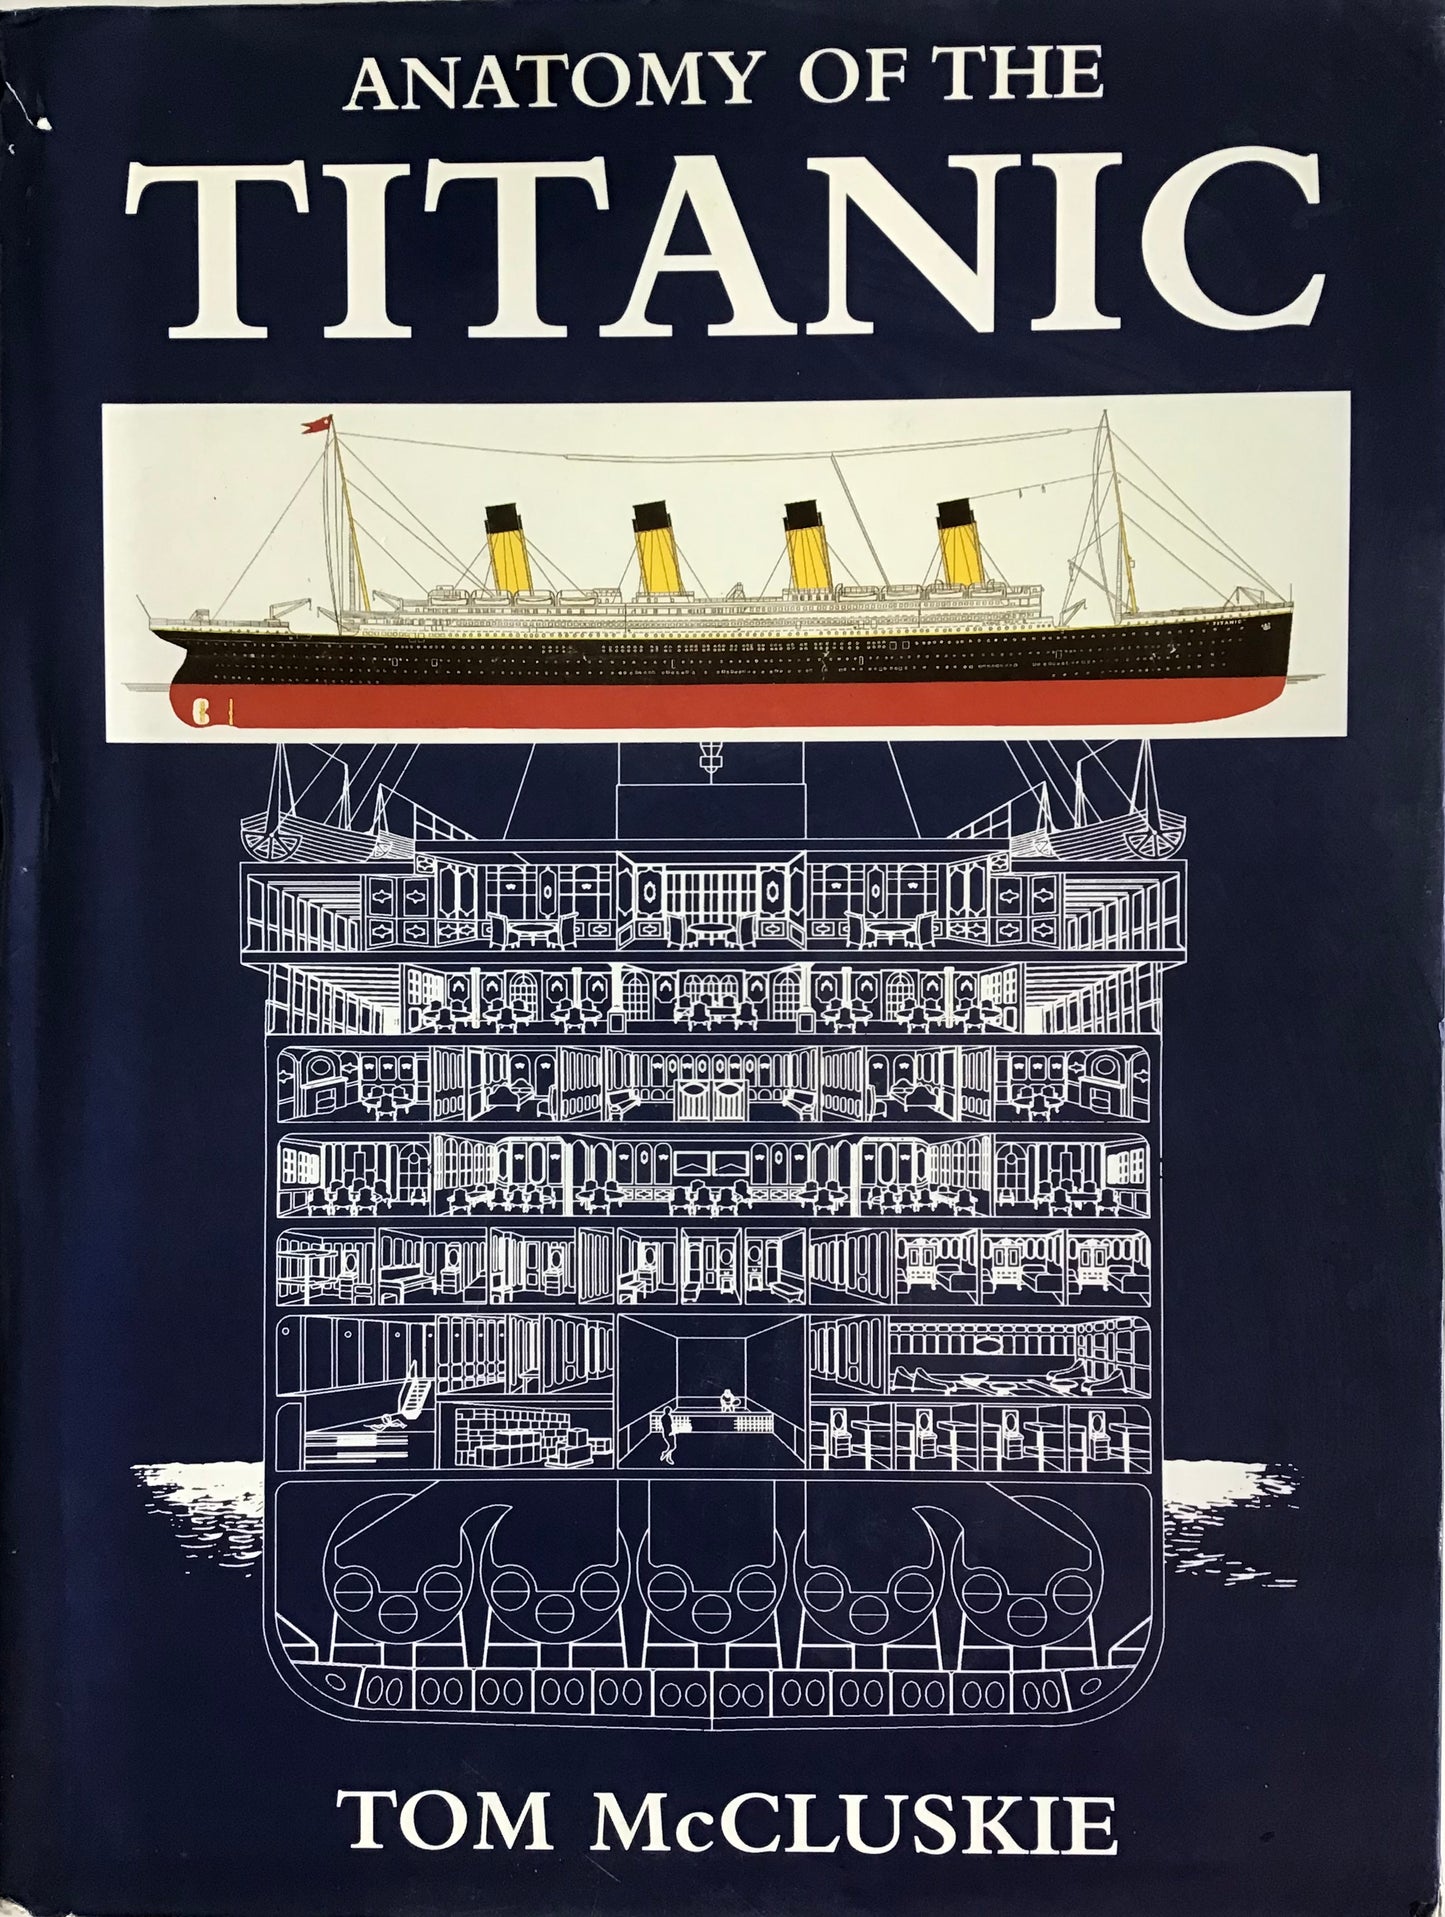 Anatomy of the Titanic by Tom McCluskie - Chester Model Centre